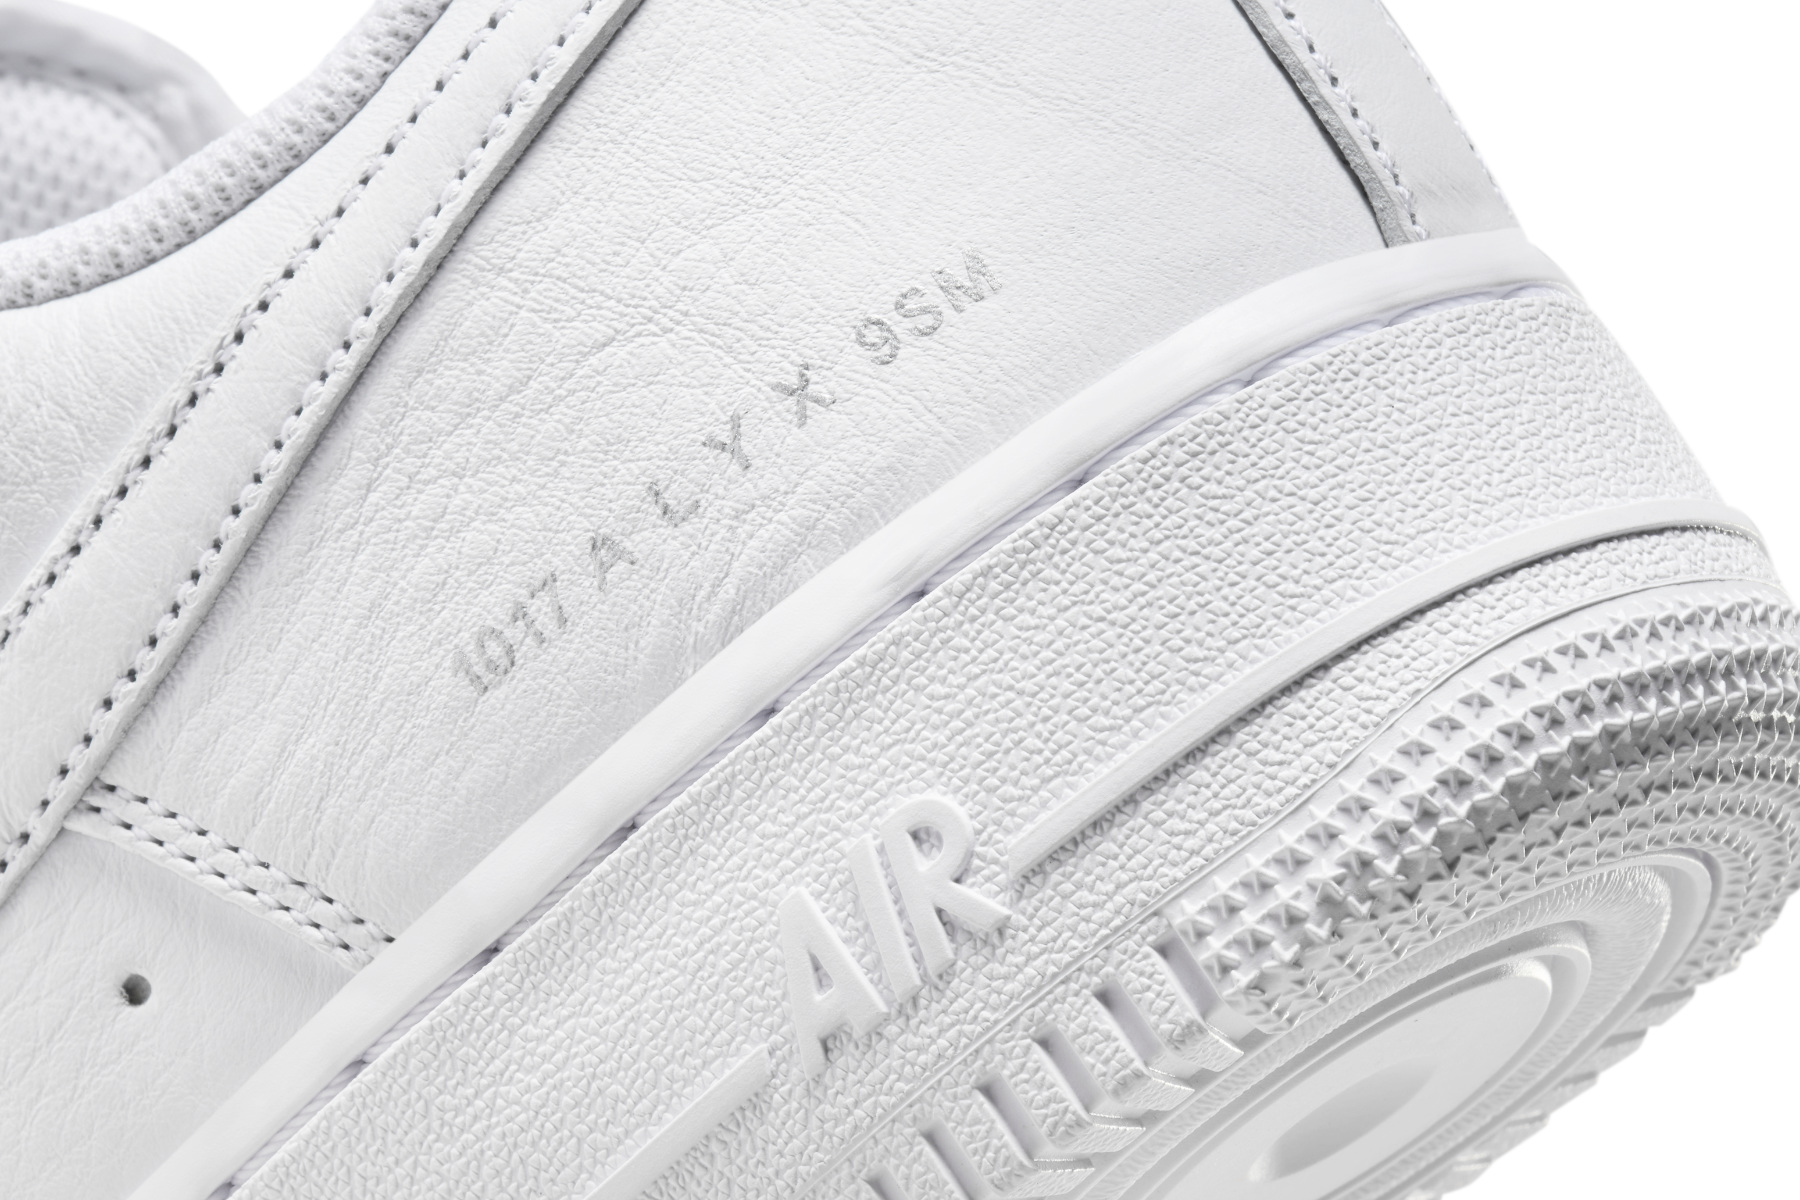 Matthew Williams' ALYX Nike AF1 Low Sneakers Are Here